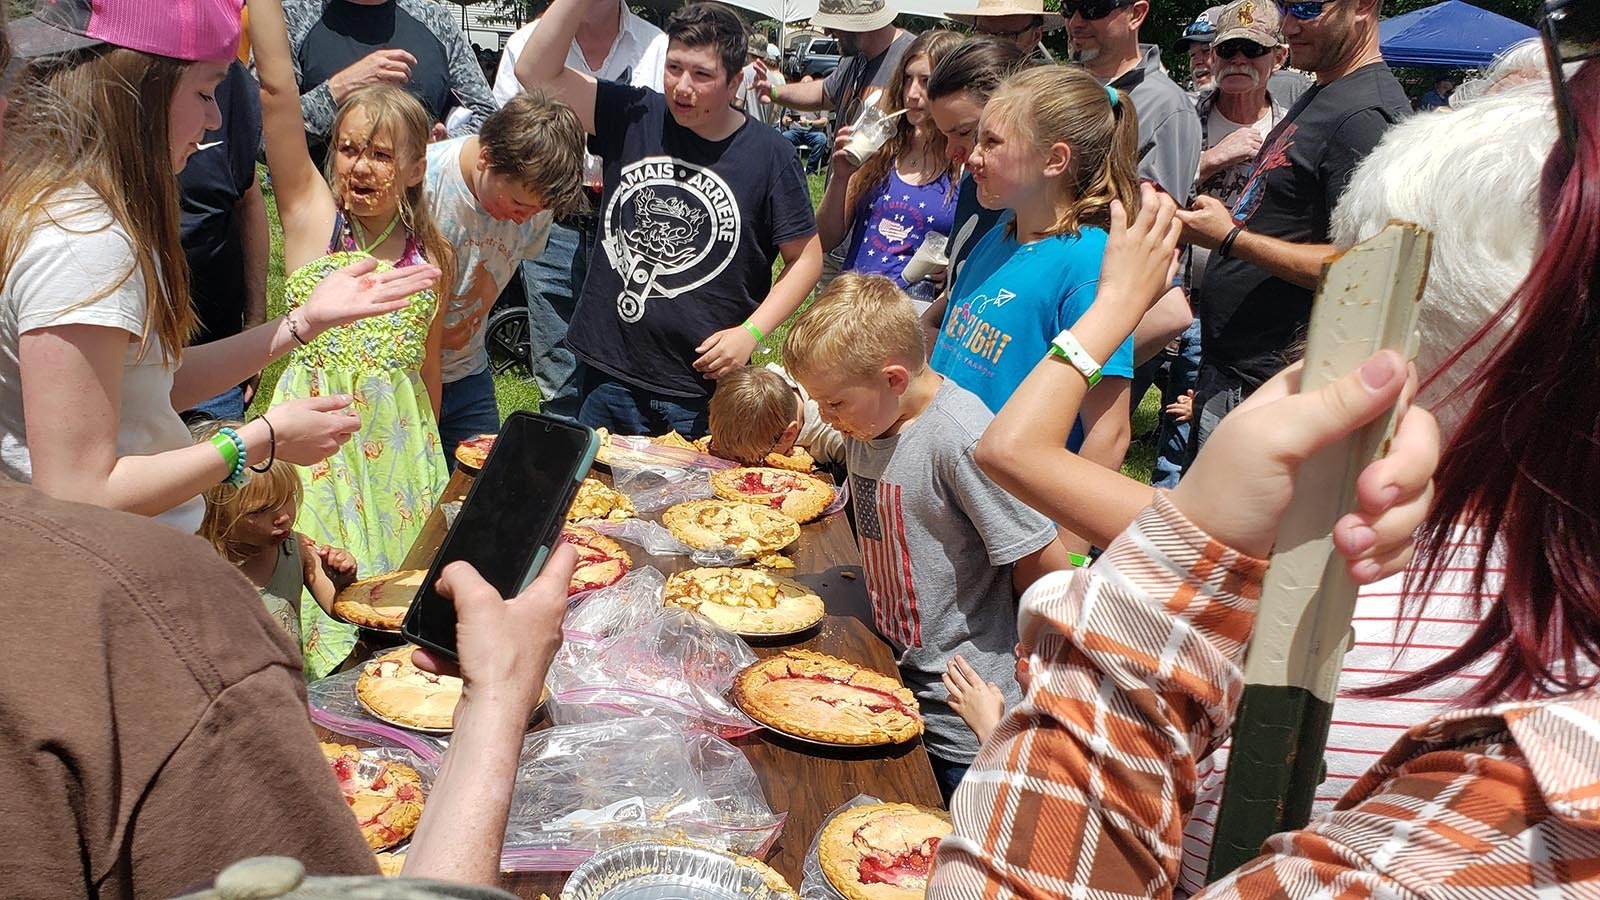 Kids dive fact-first into the pie-eating competition at the Chugwater Chili Cookoff on Saturday.